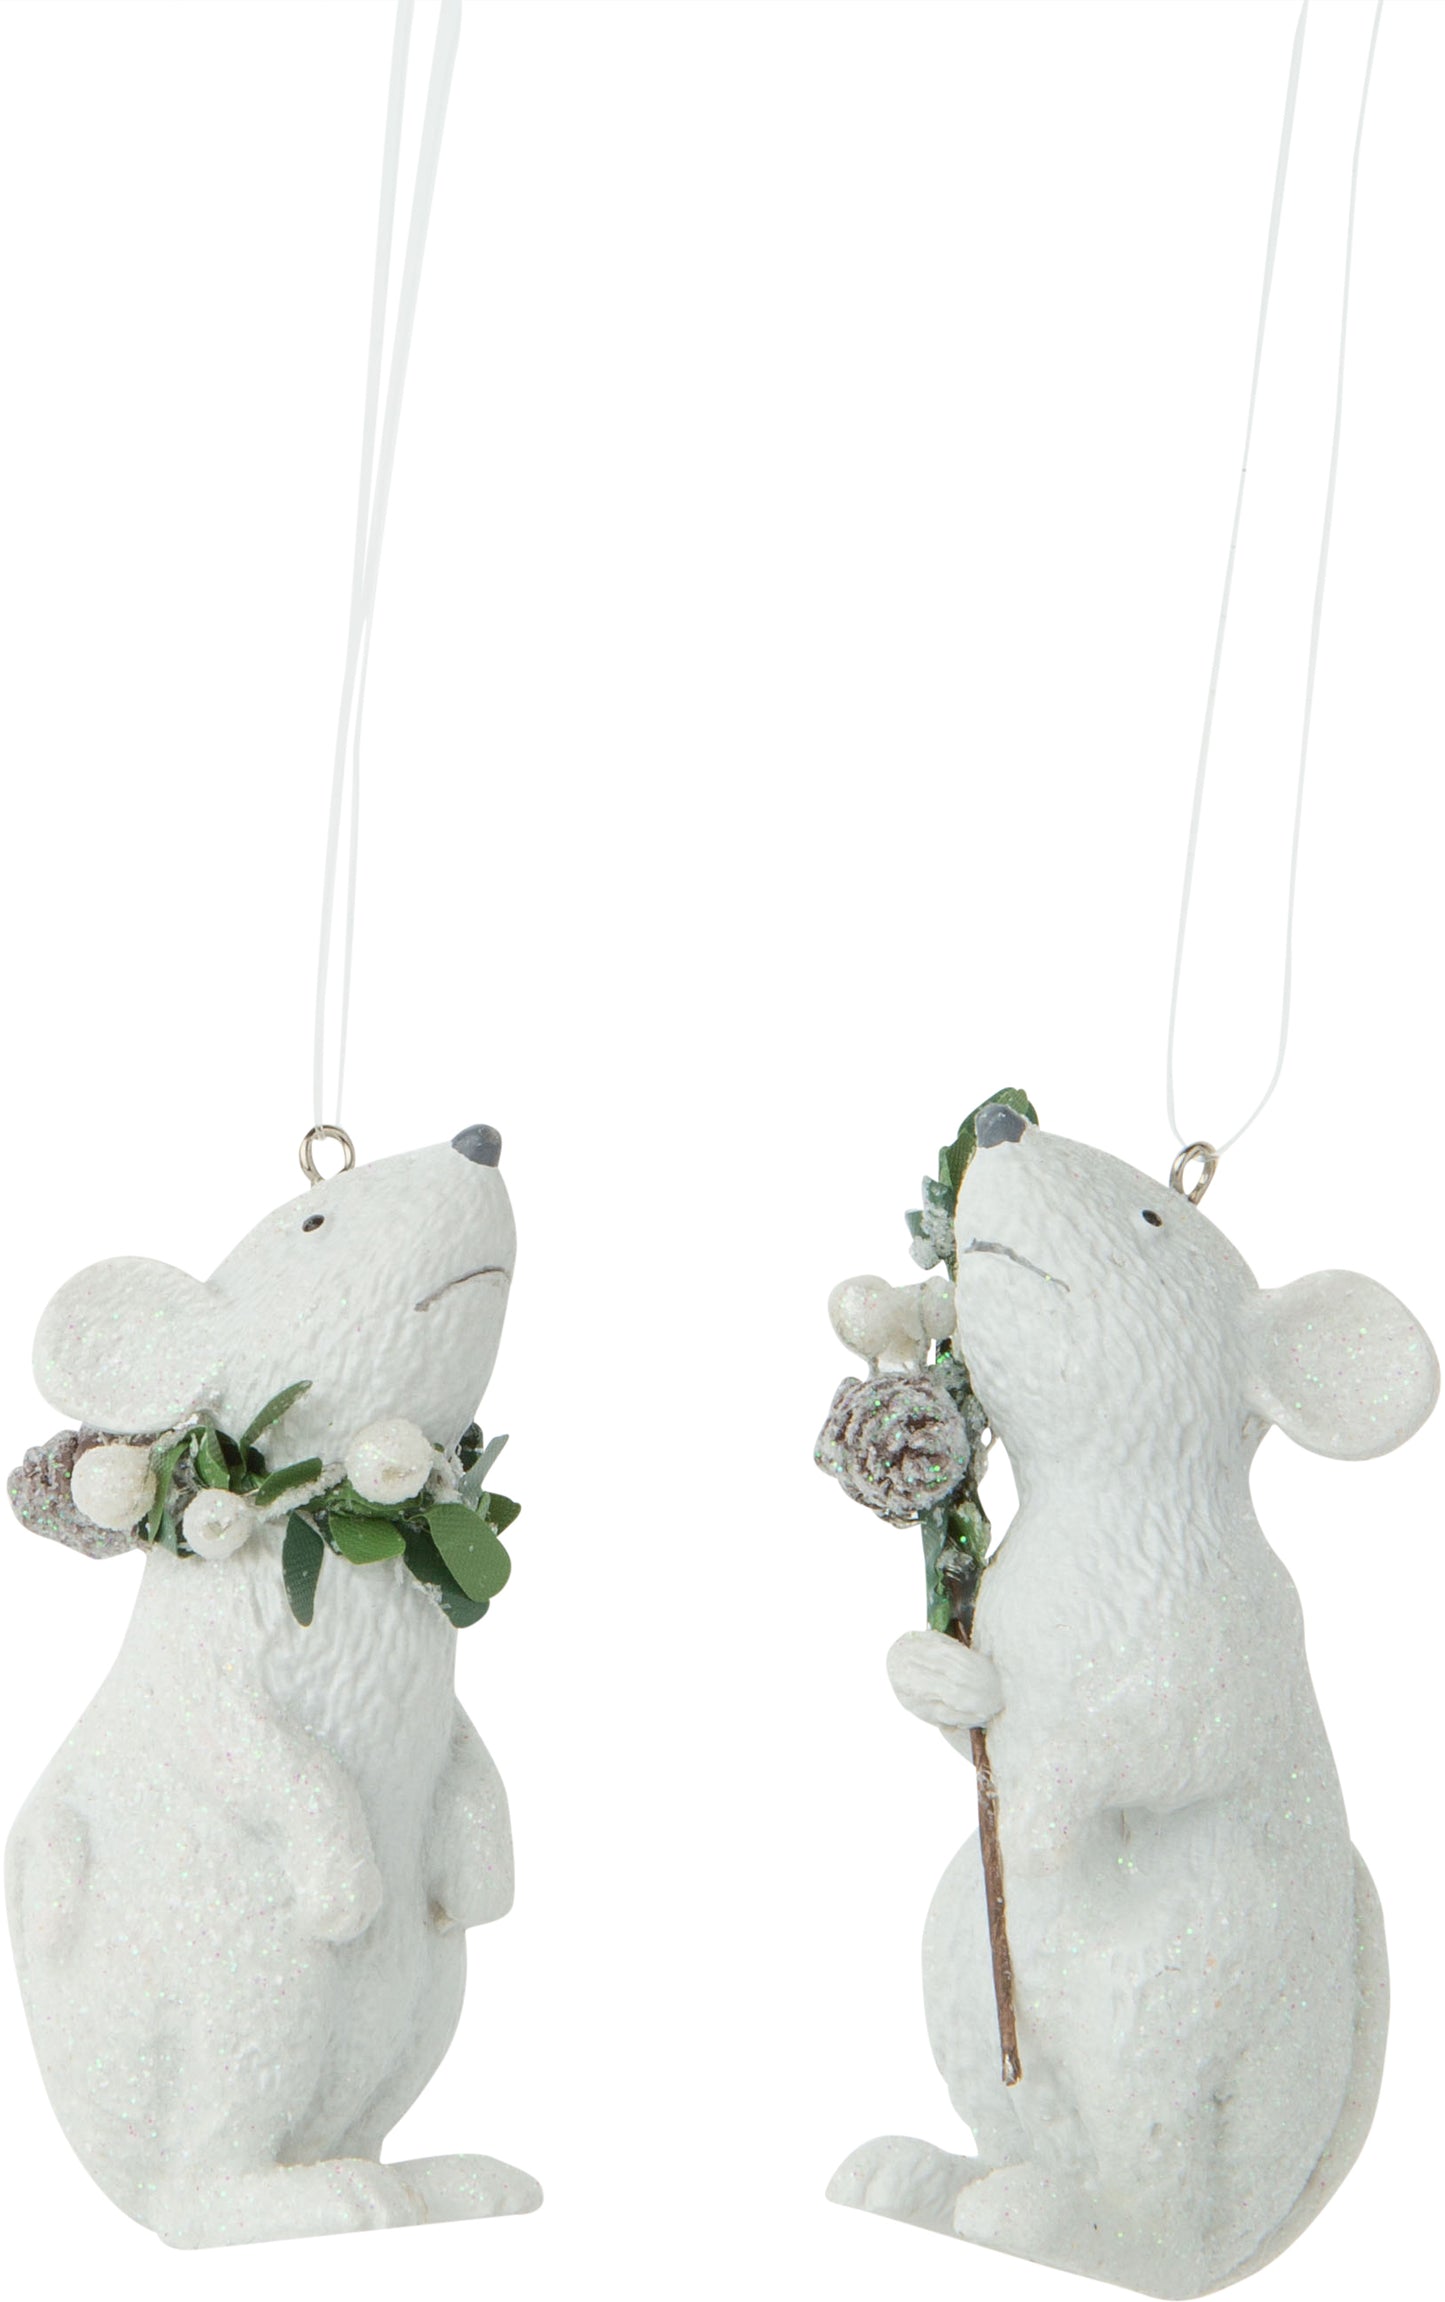 Hare Resin Ornaments- White/Green with White Glitter Berries